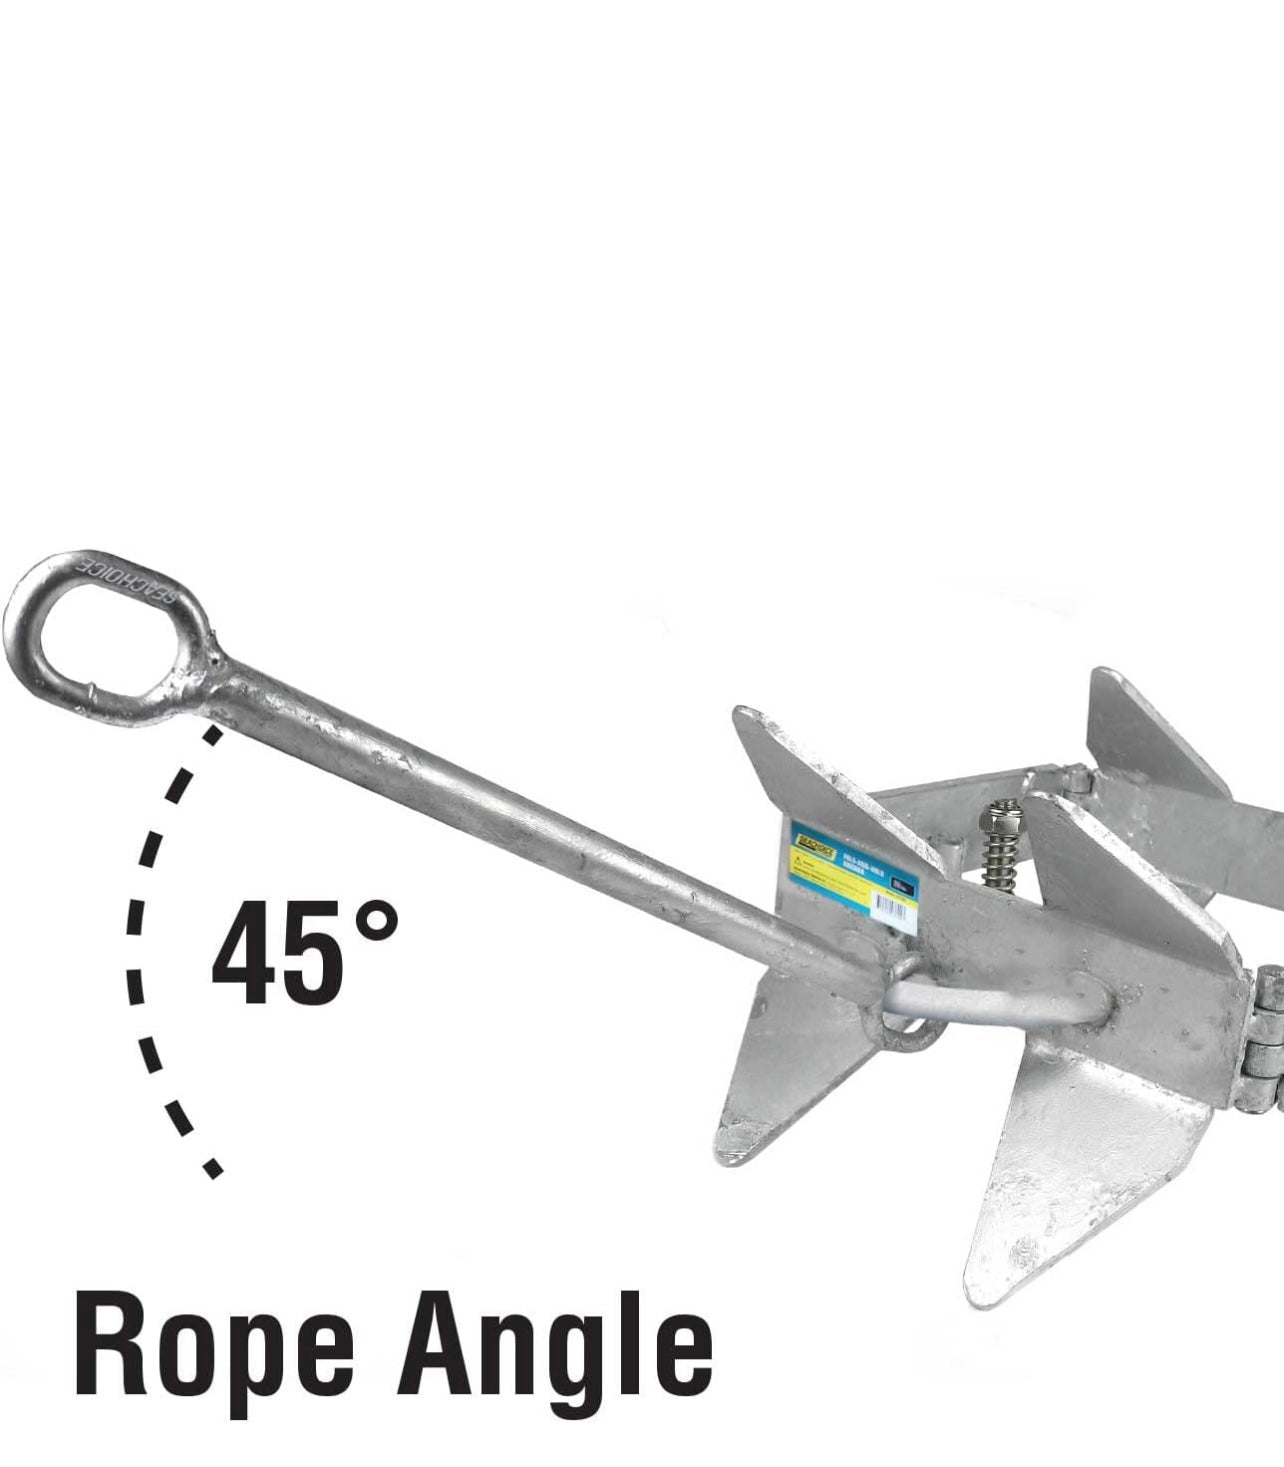 Seachoice Hot-Dipped Galvanized Steel Fold-and-Hold Anchor 19lbs